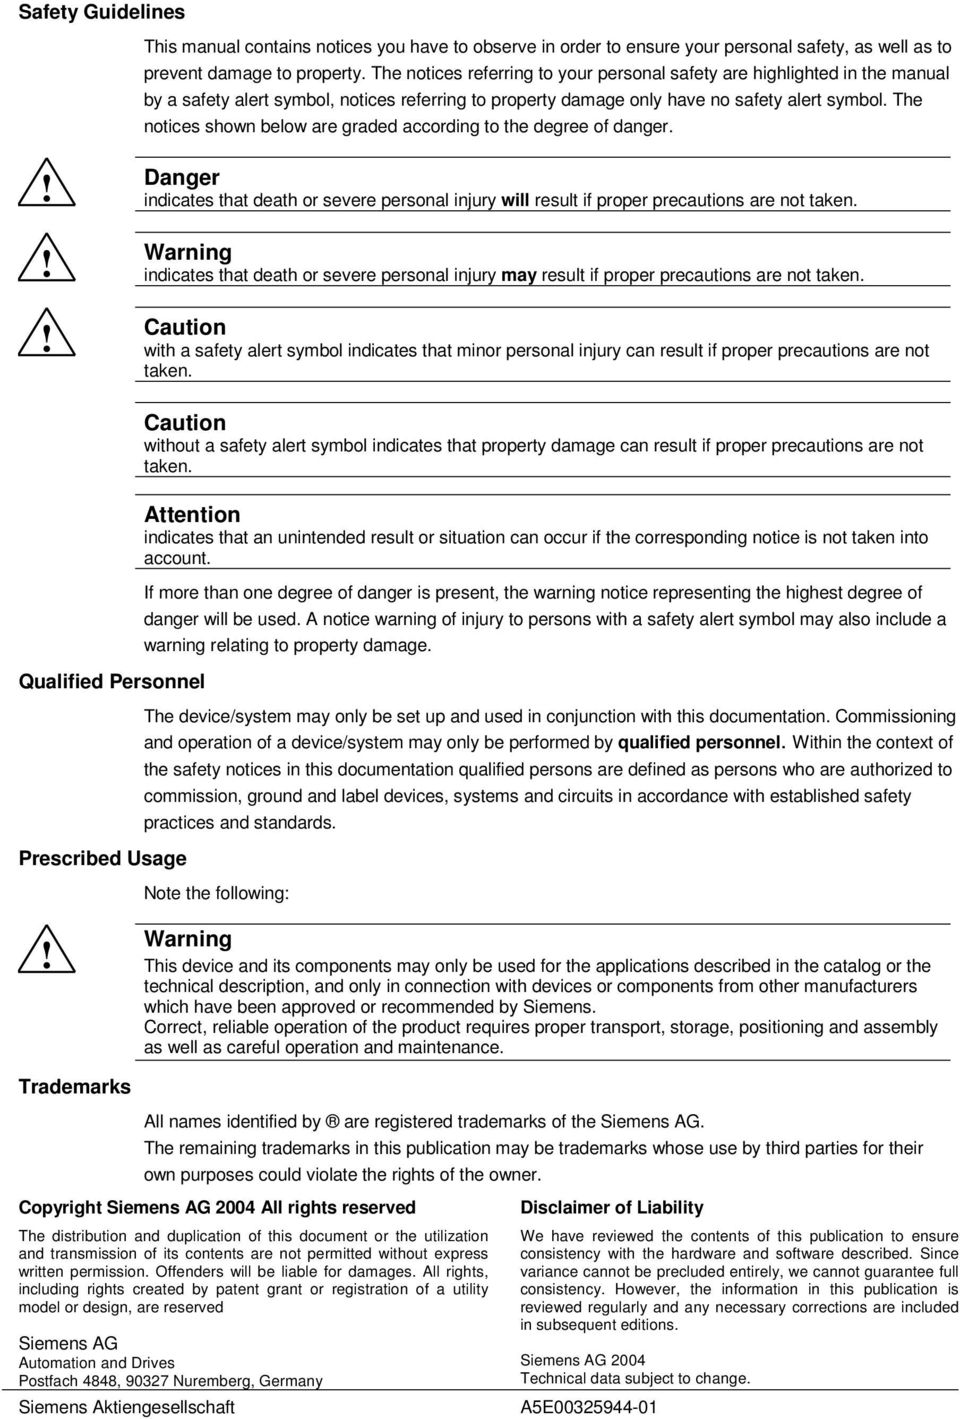 The notices shown below are graded according to the degree of danger.!!! Danger indicates that death or severe personal injury will result if proper precautions are not taken.